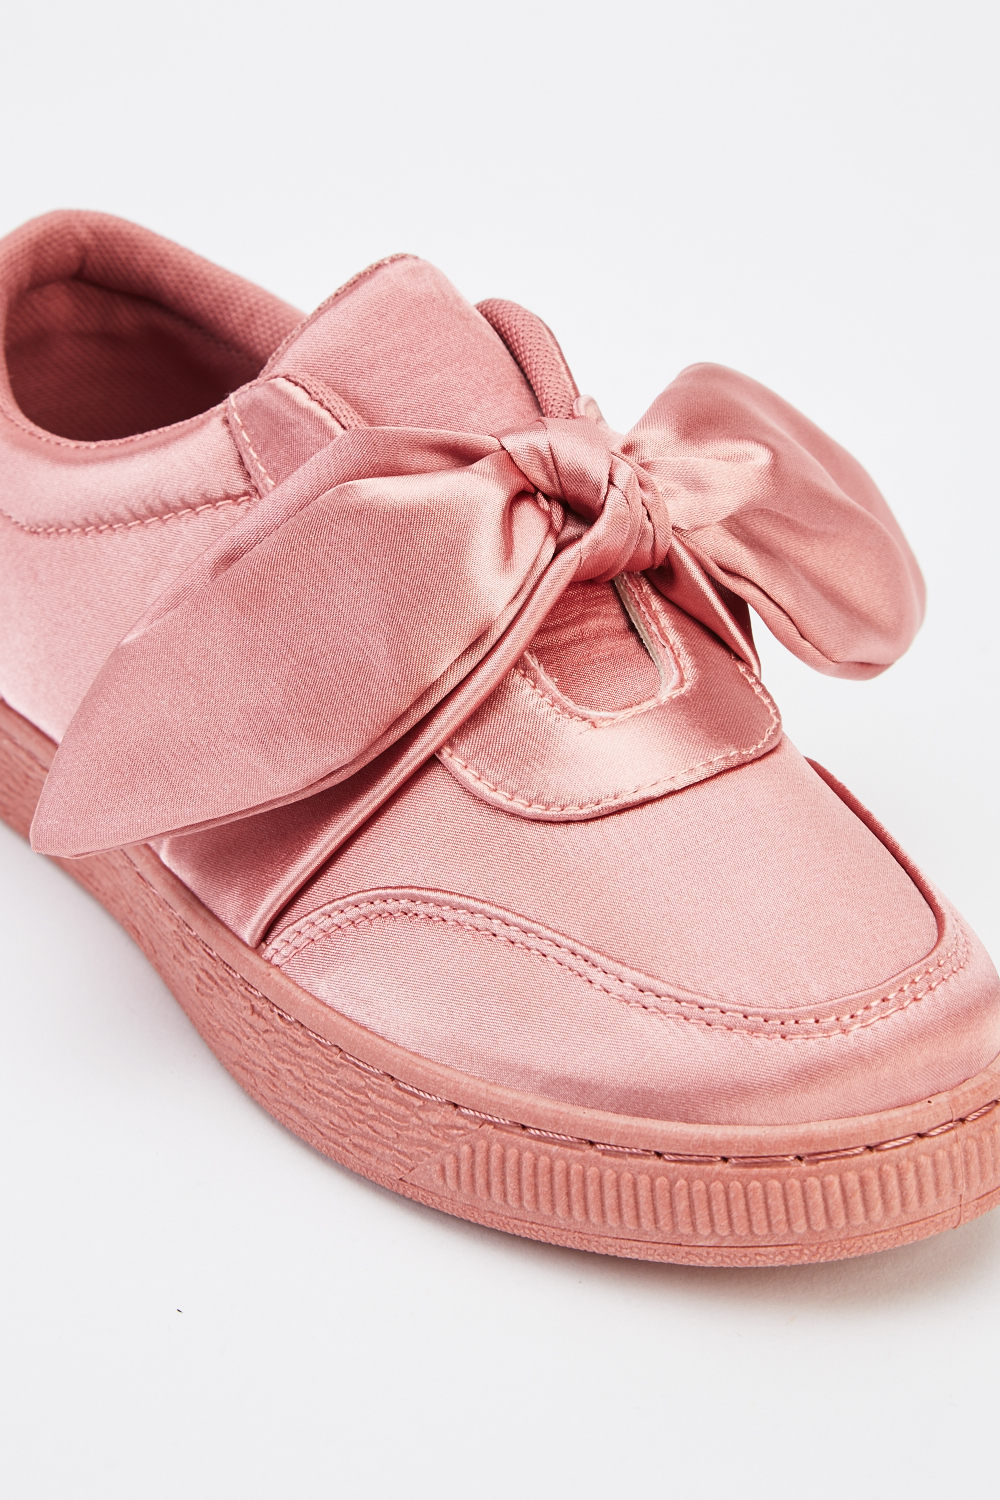 Sateen Ribbon Lace Up Shoes - Just $7